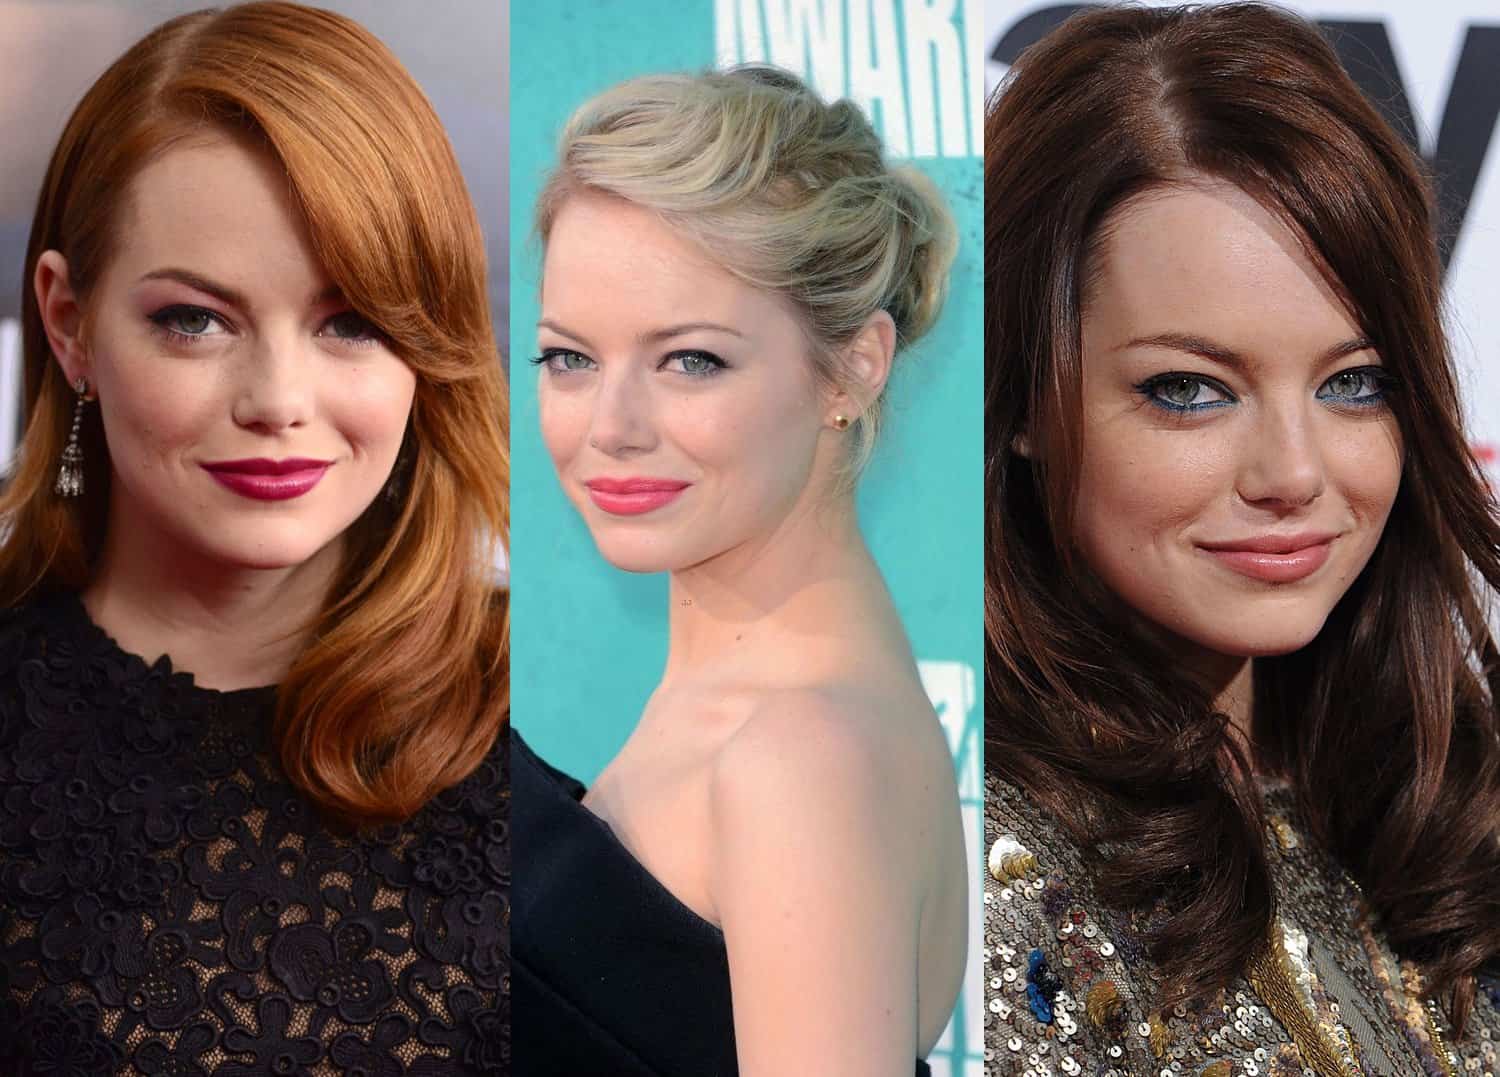 12 Female Celebrities Who Look Great With Any Hair Color